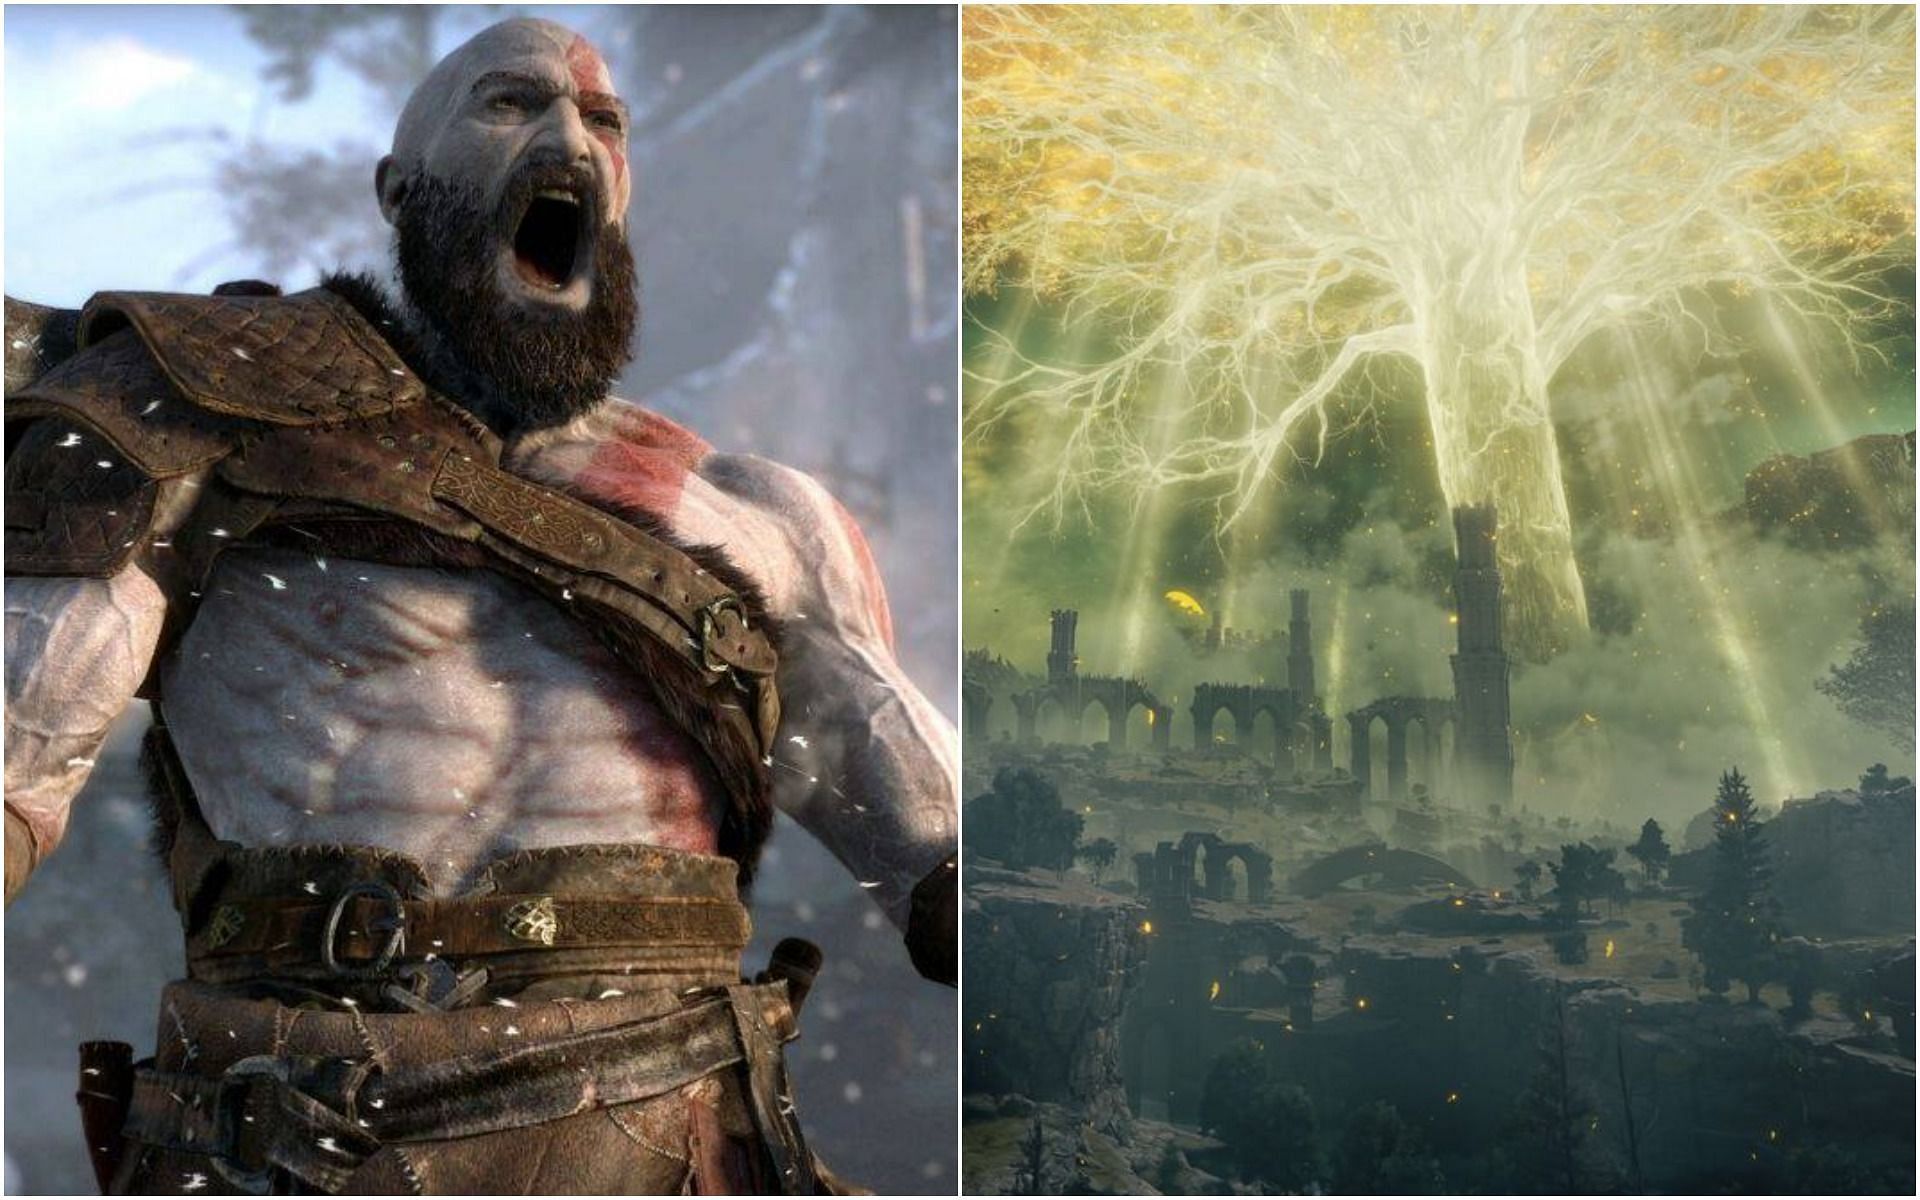 After destryoing his villains in God of War, Kratos has now come to make his mark in Elden Ring (Image via God of War/FromSoftware)